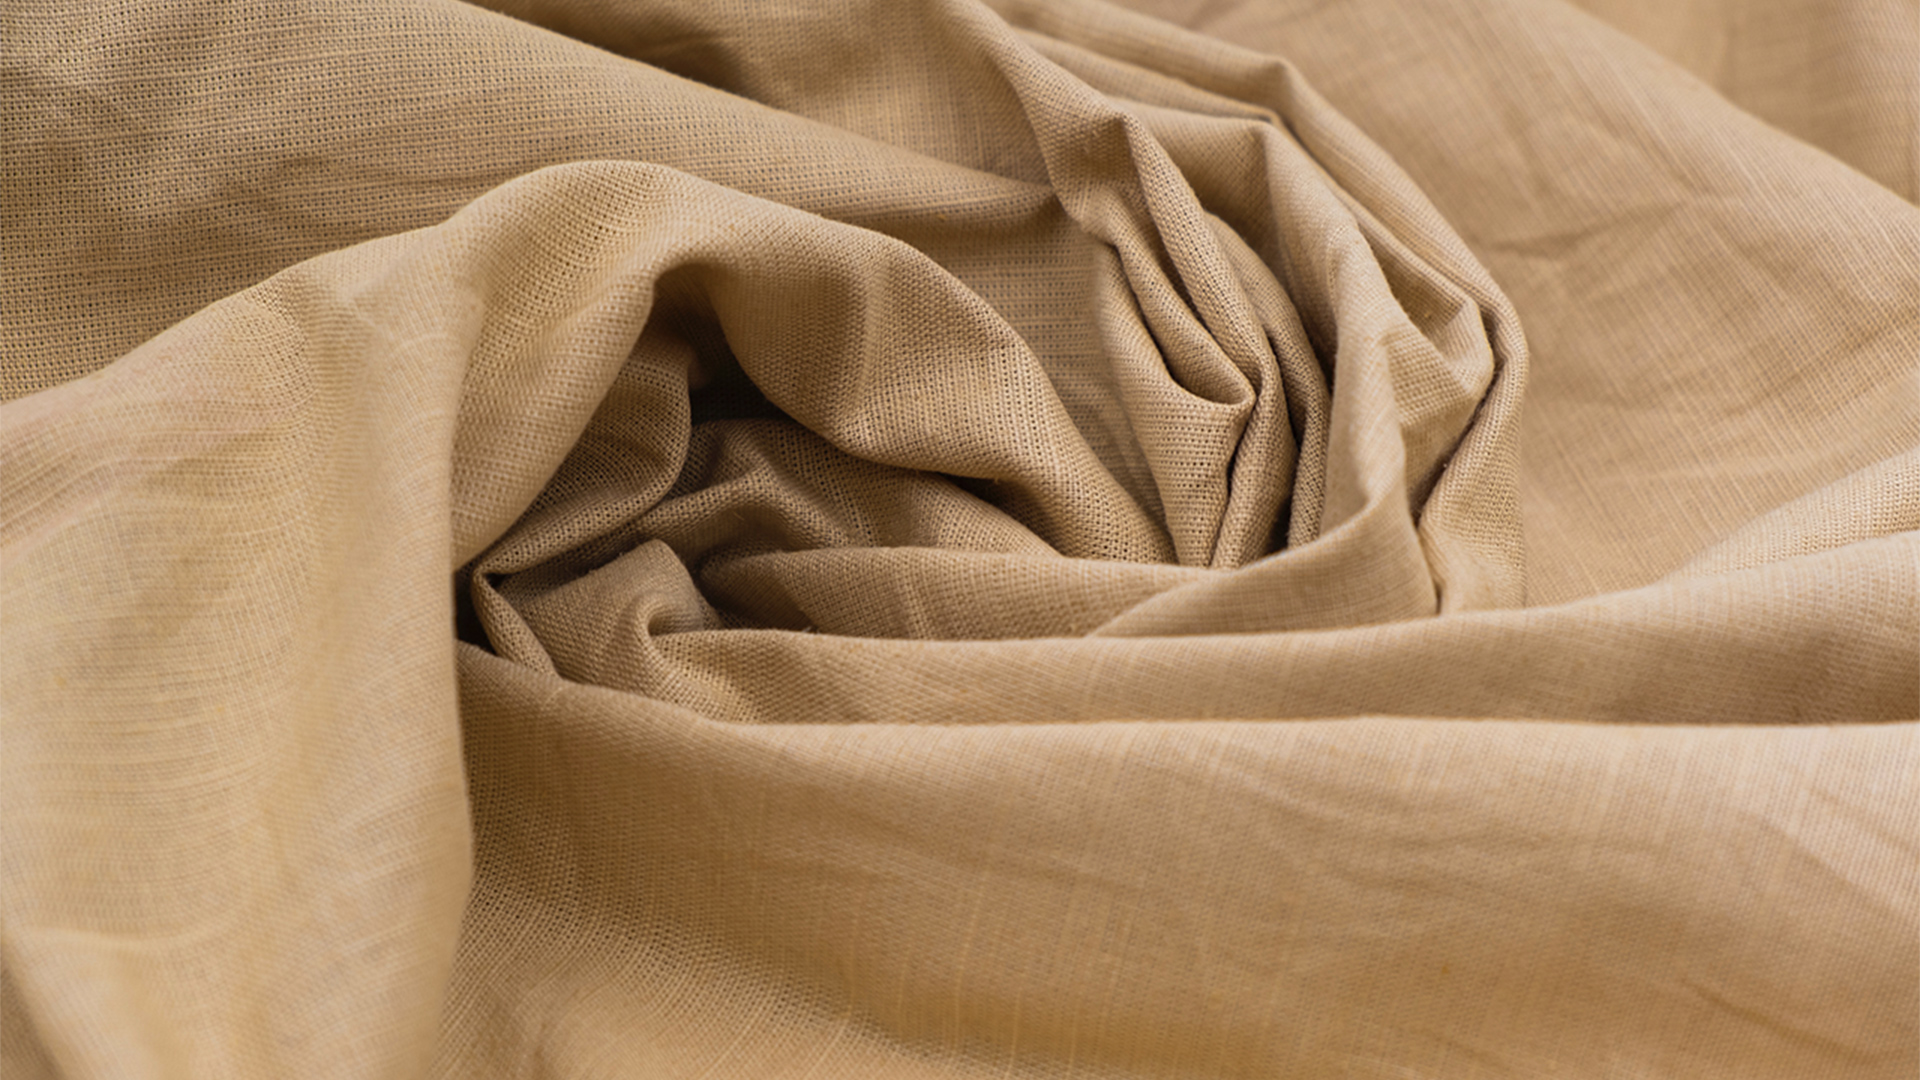 Bunched up beige fabric